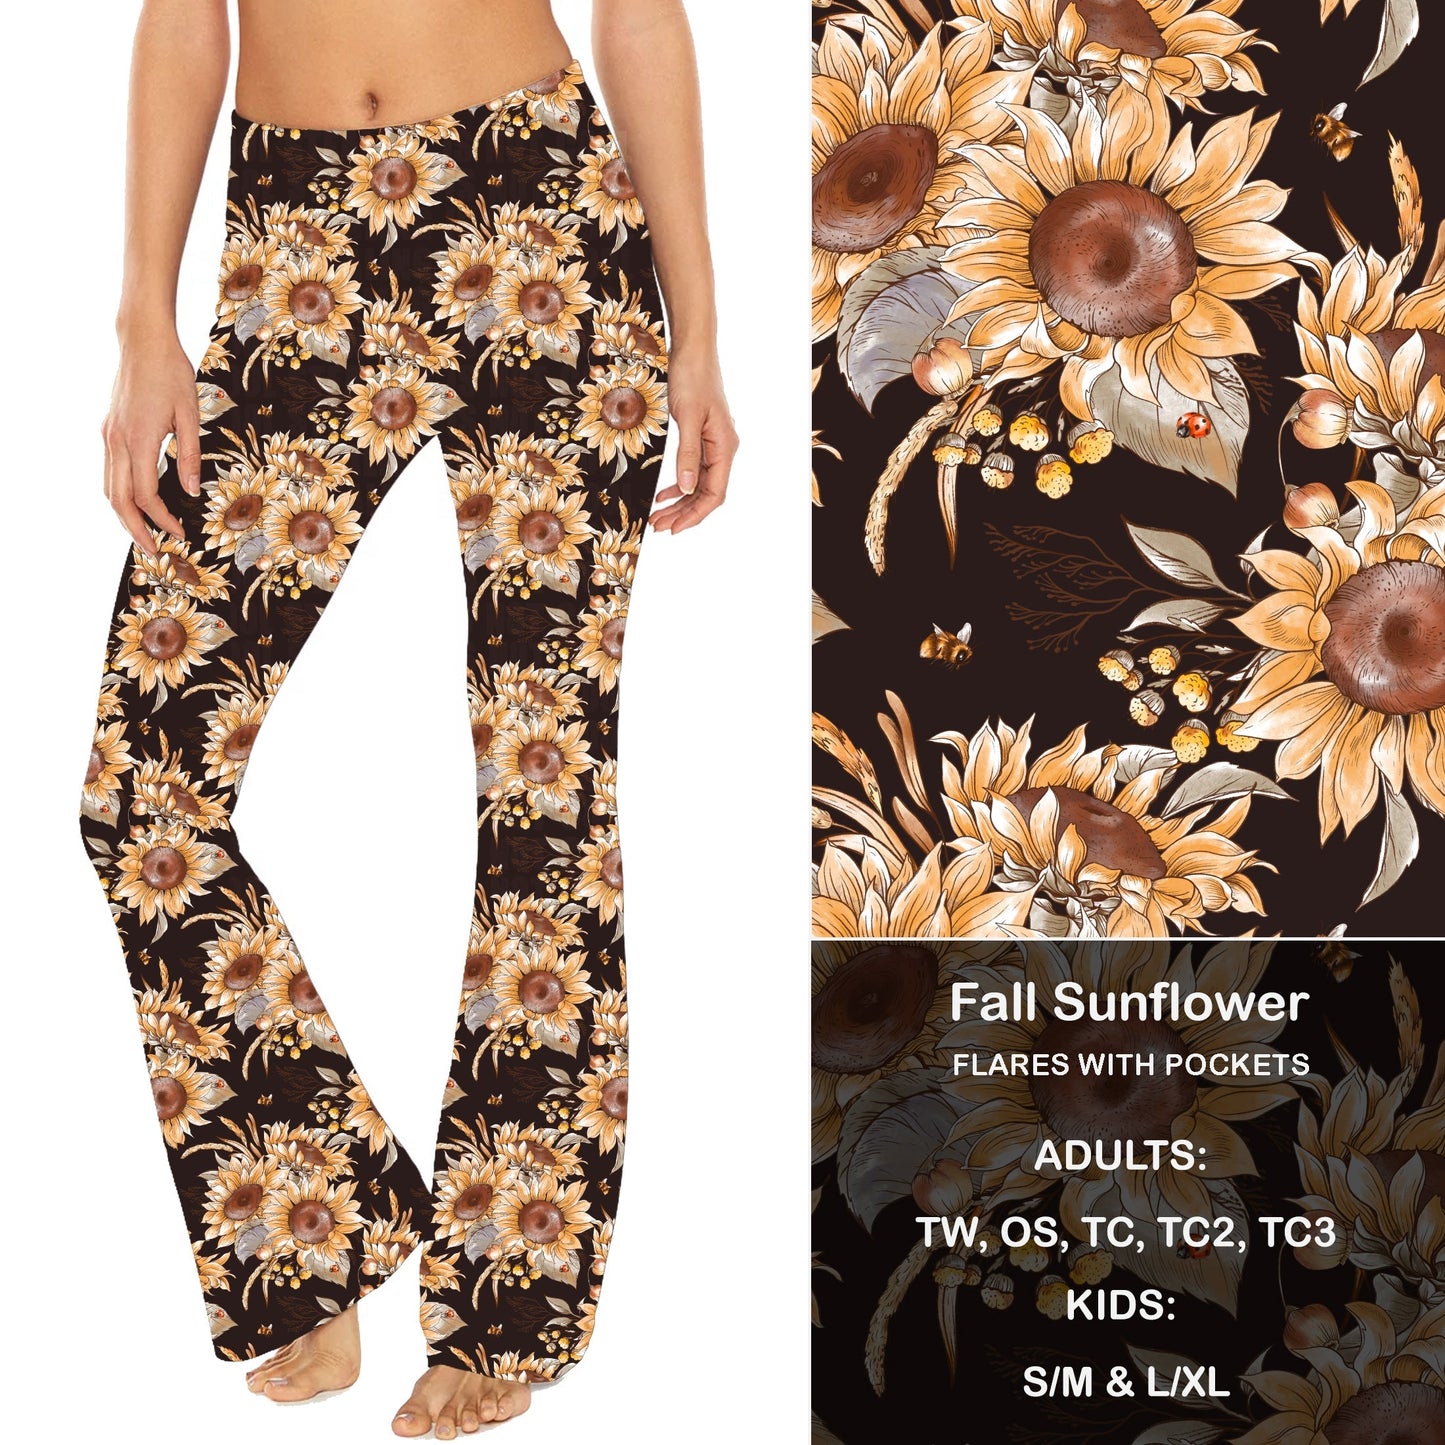 Fall Sunflowers - Yoga Flares with Pockets